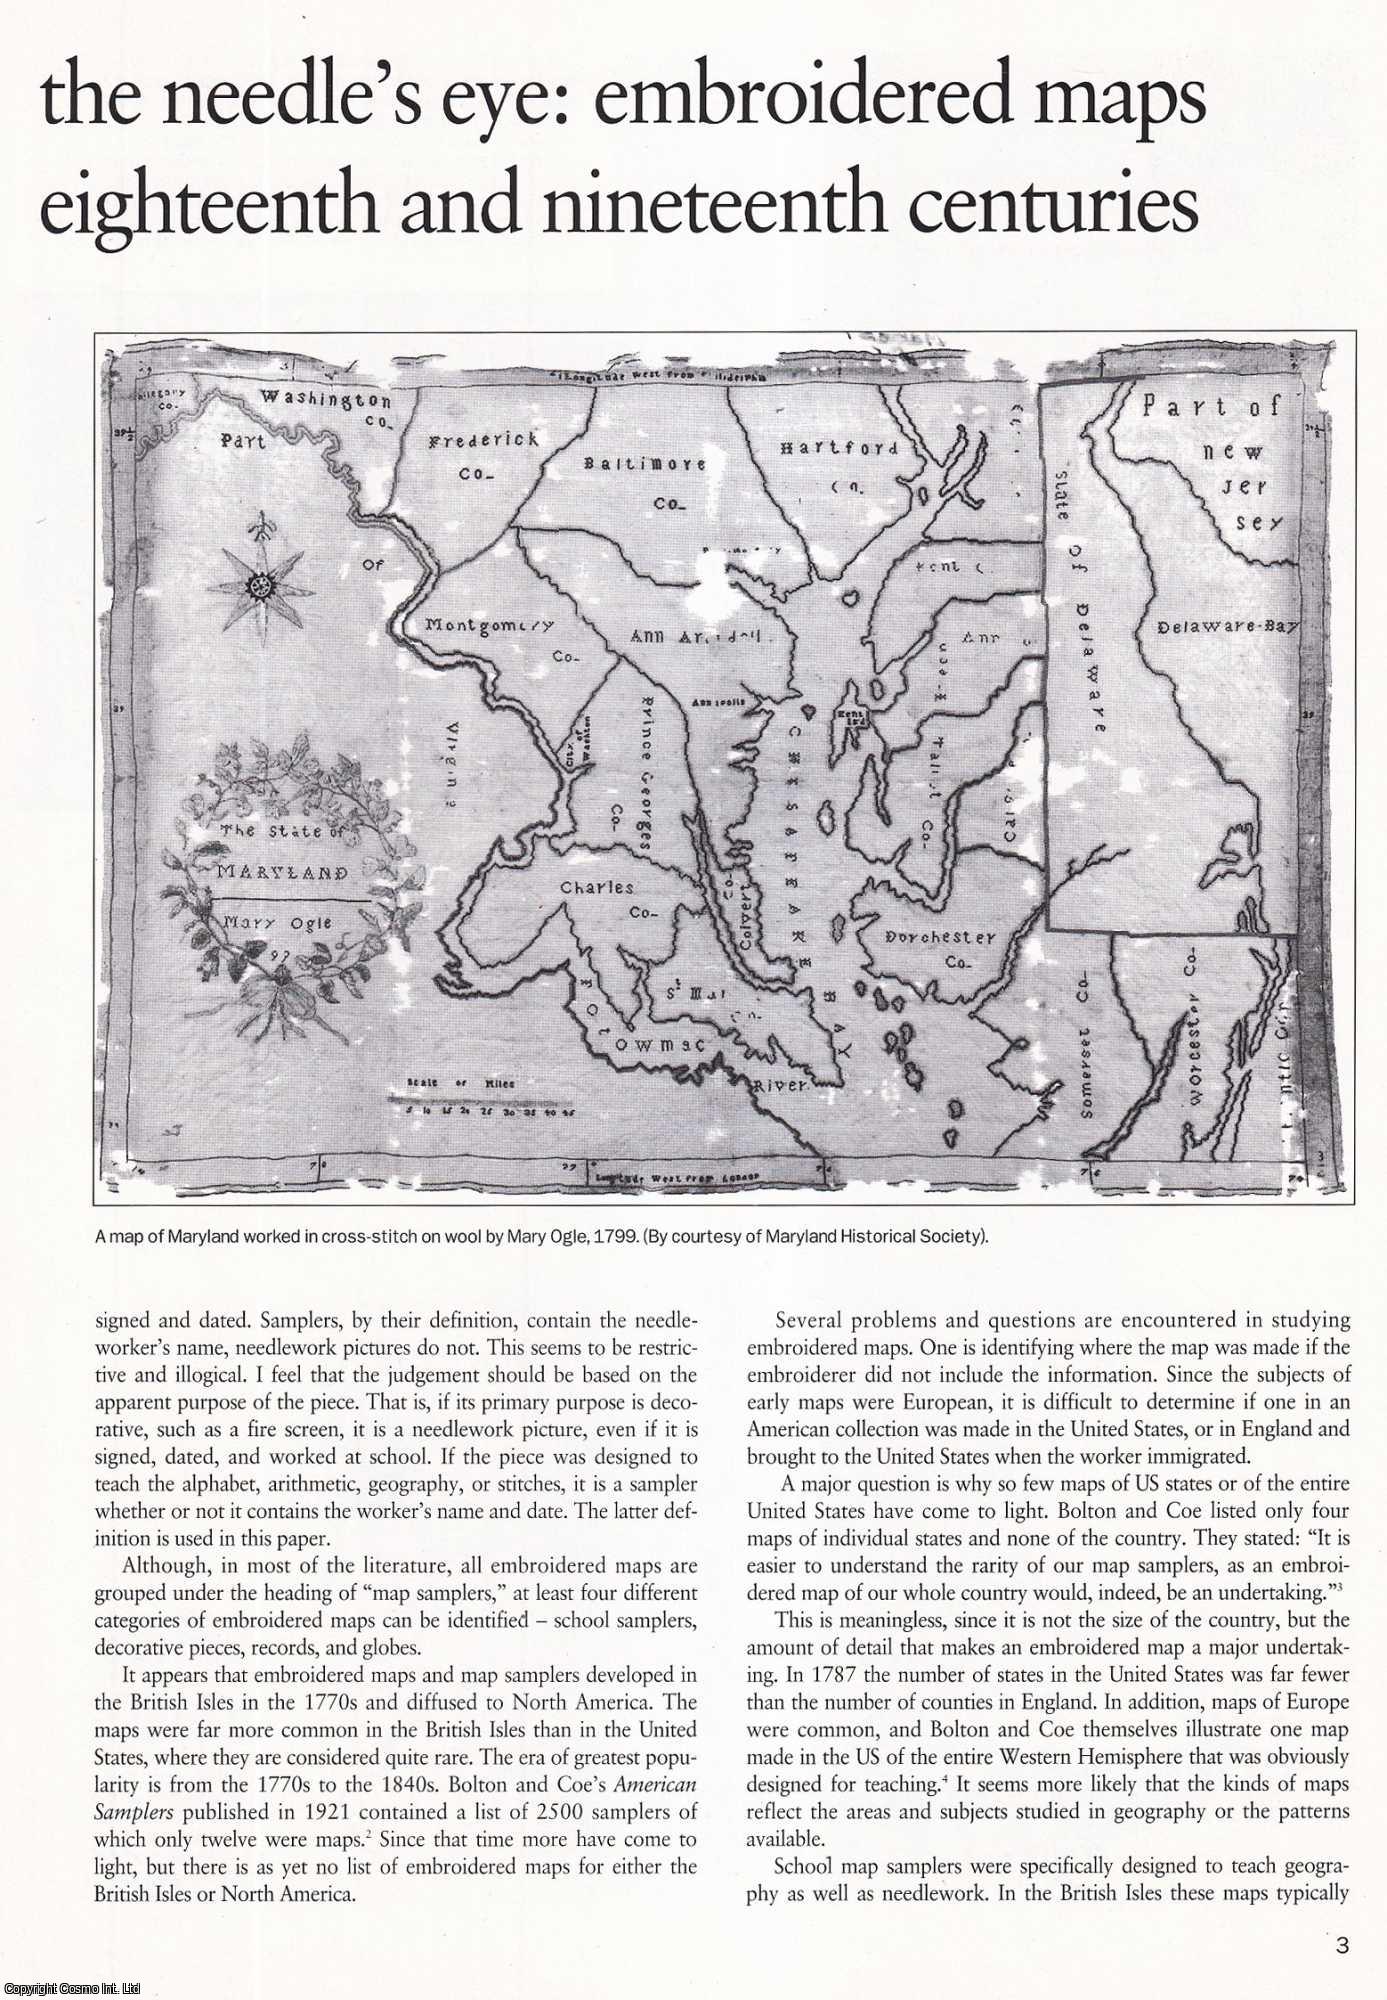 Judith Tyner - Geography through the Needle's Eye: Embroidered Maps and Globes in the Eighteenth and Nineteenth Centuries. An original article from Map Collector Magazine, 1994.